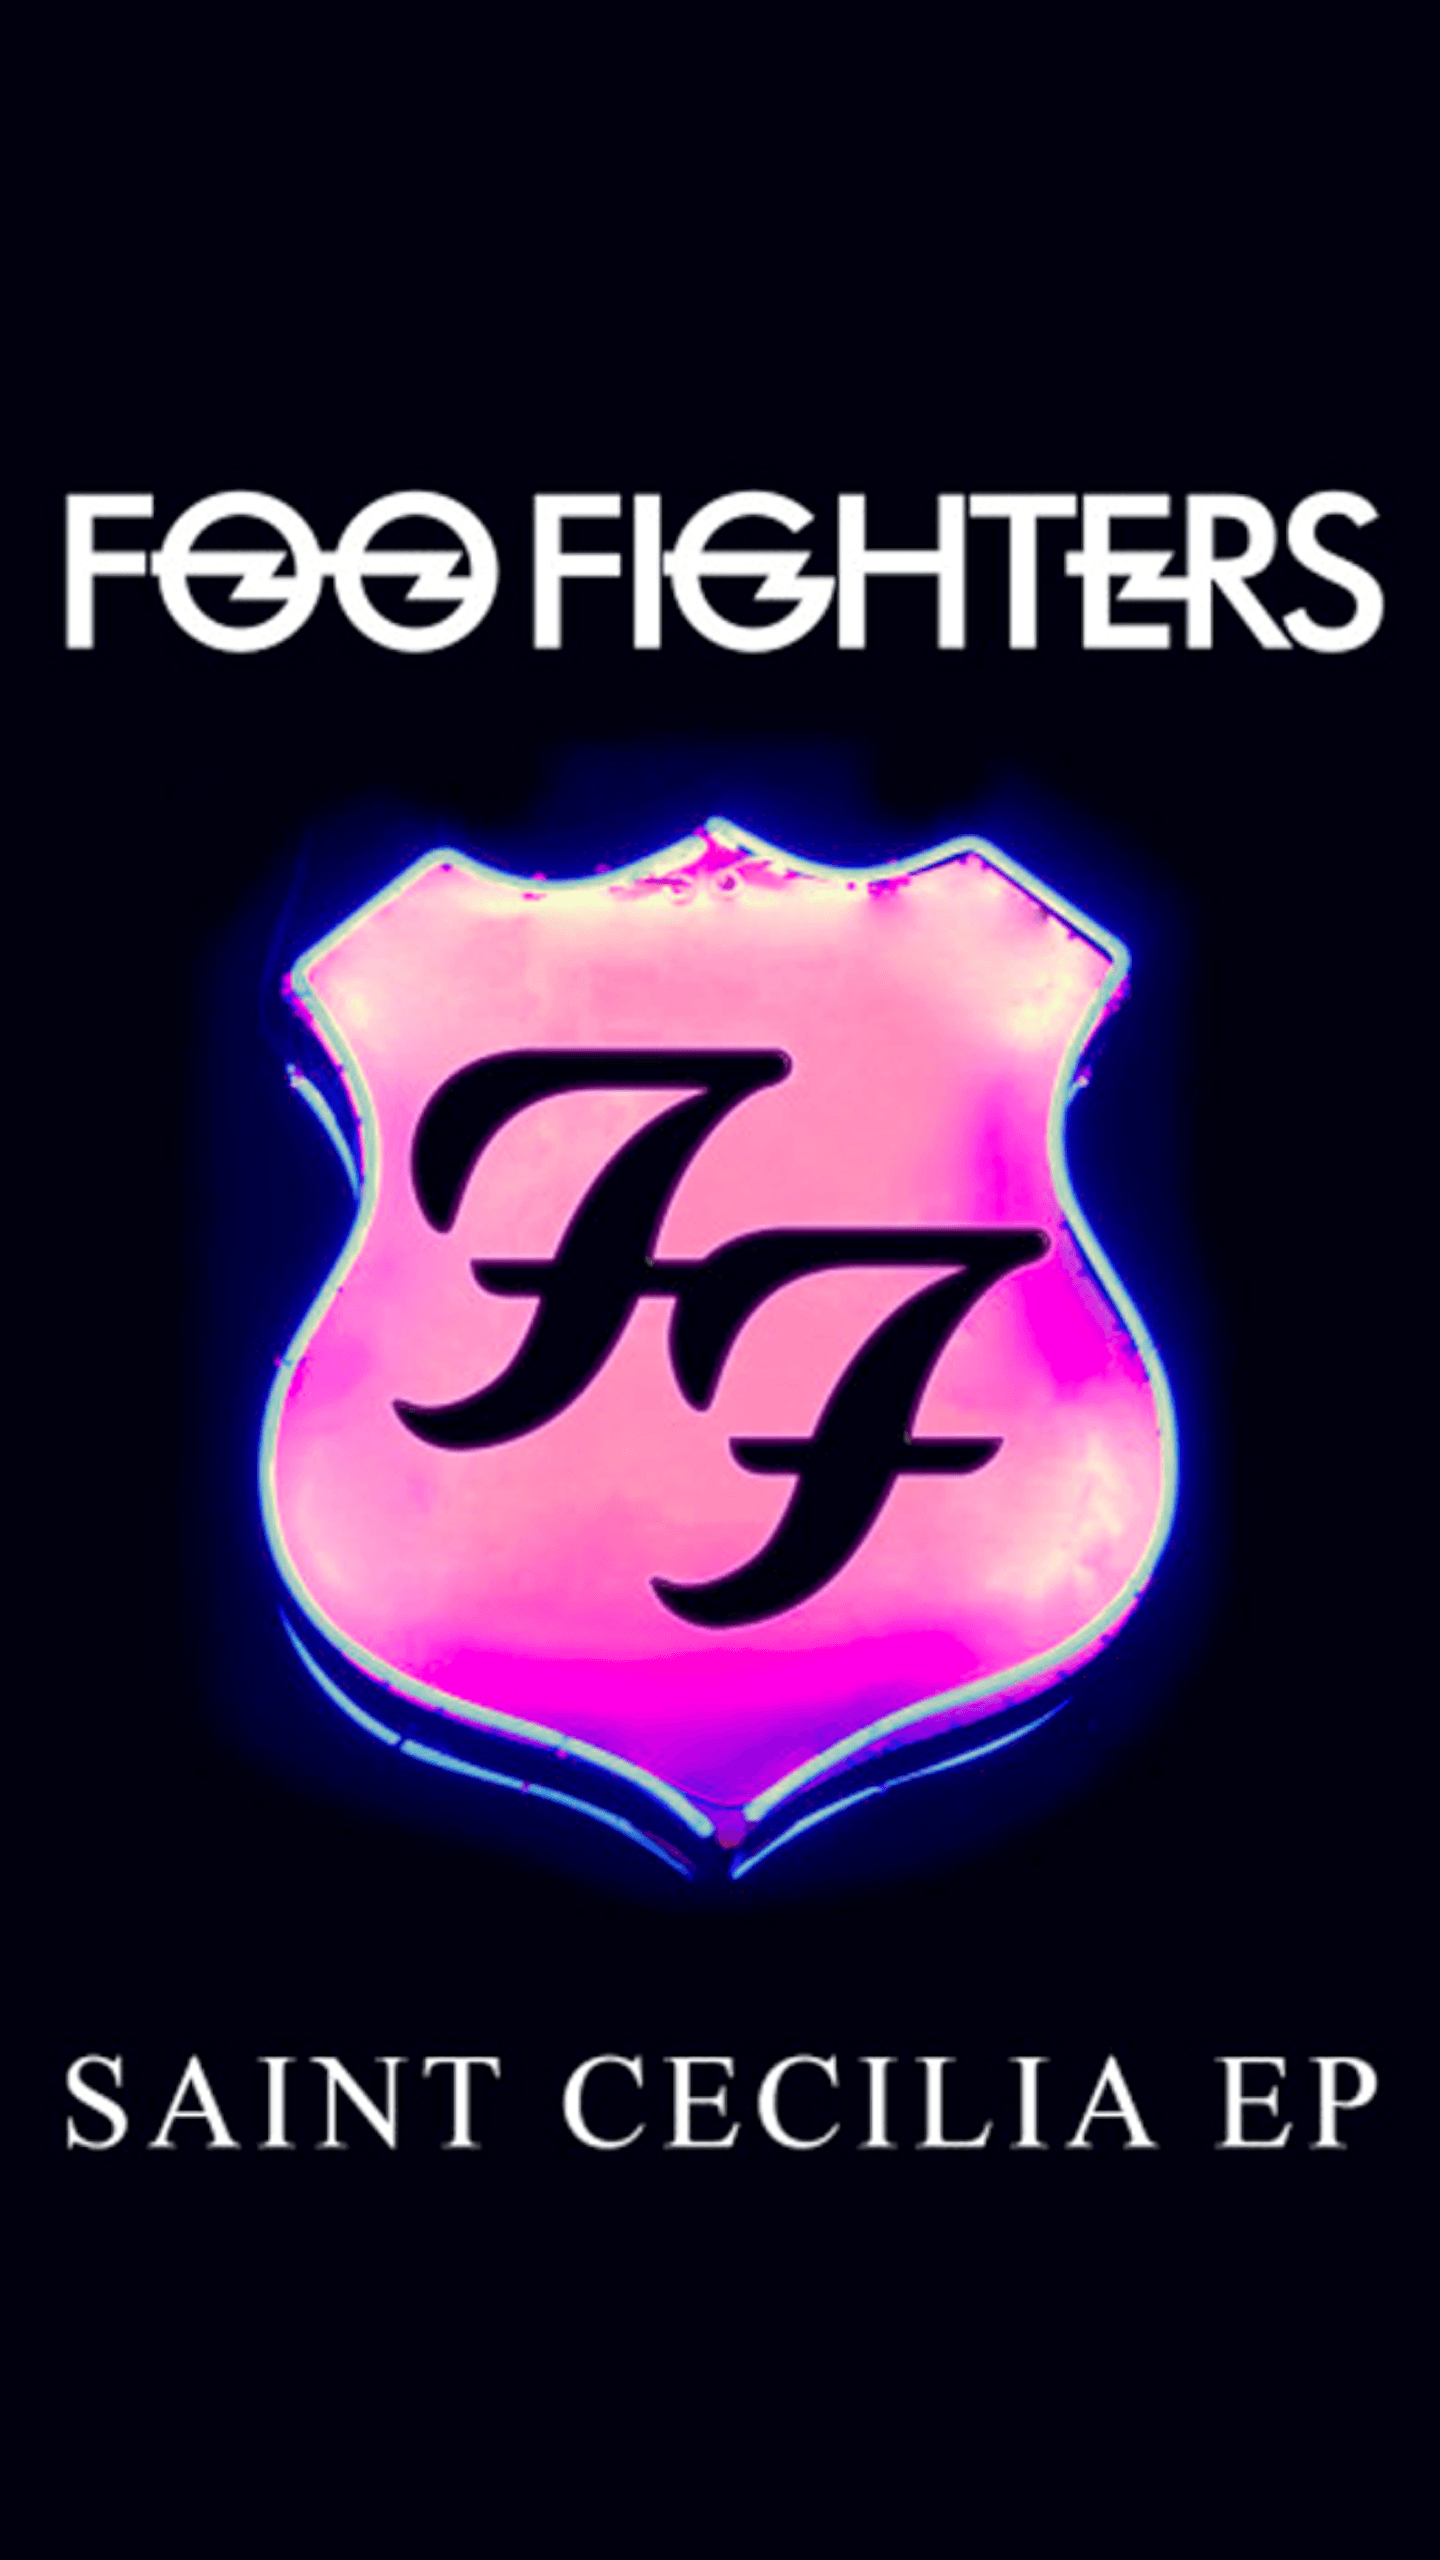 Group of Foo Fighters Wallpaper For iPhone